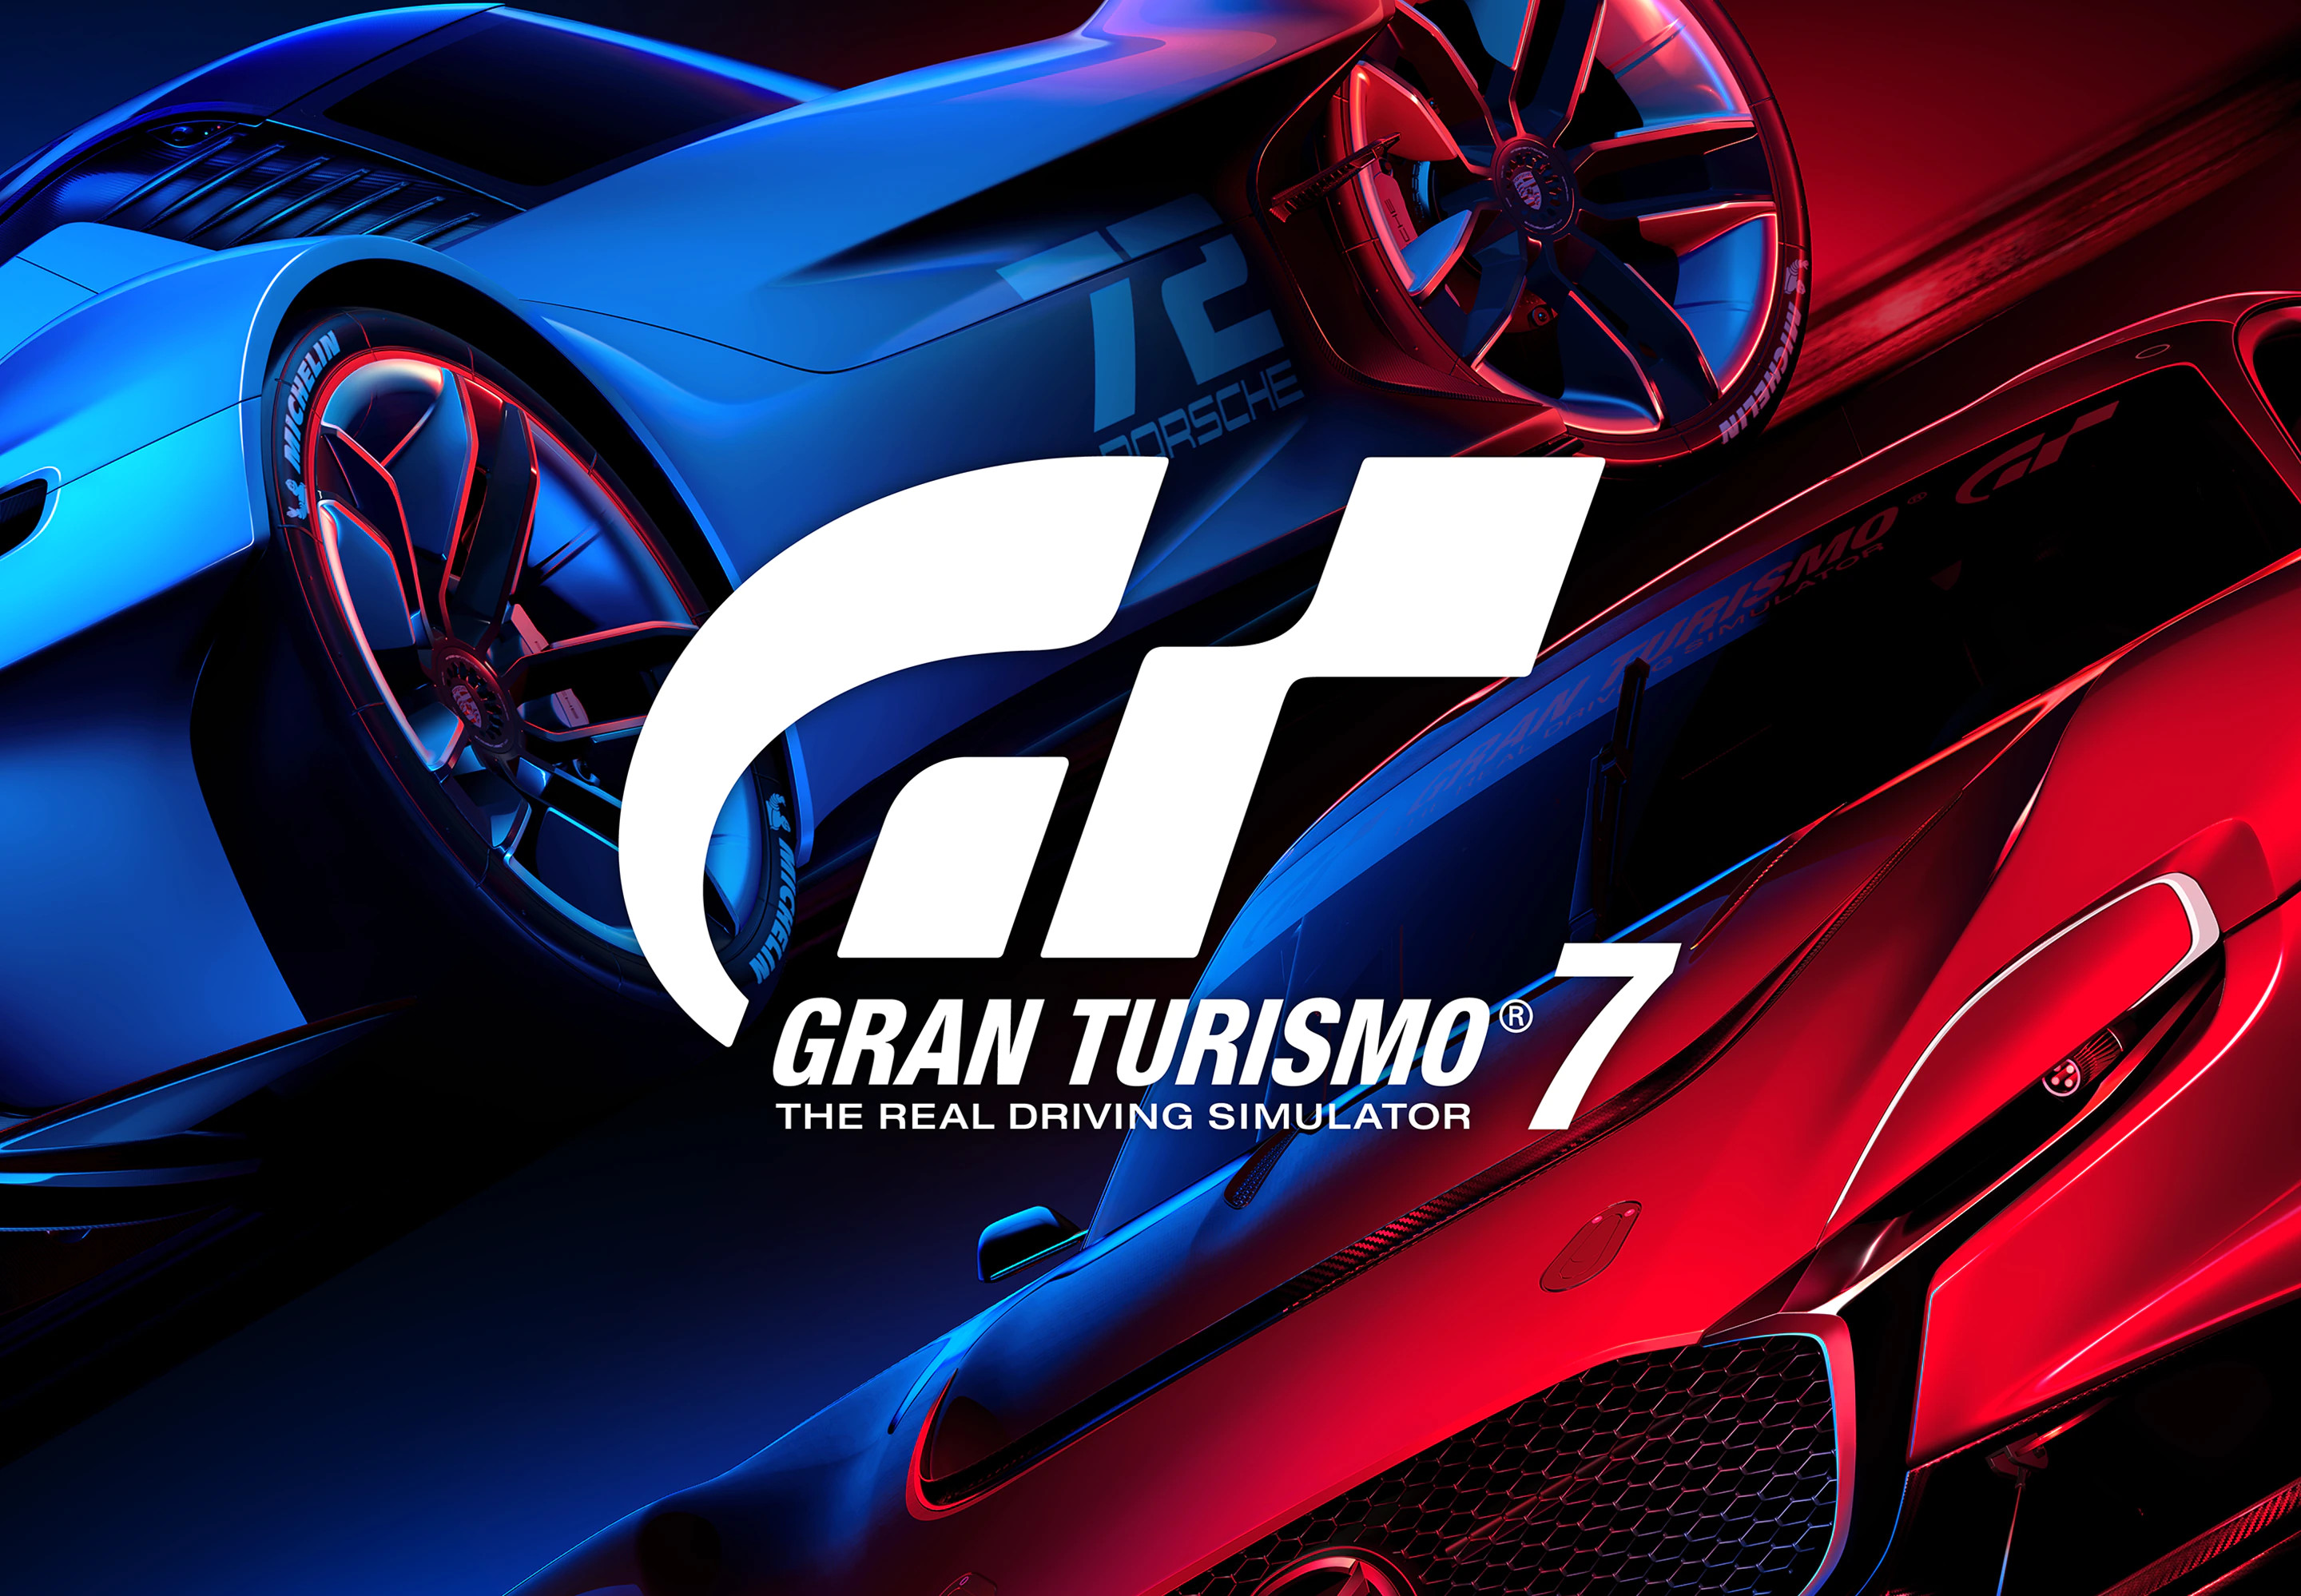 Gran Turismo 7 PlayStation 4 Account Pixelpuffin.net Activation Link